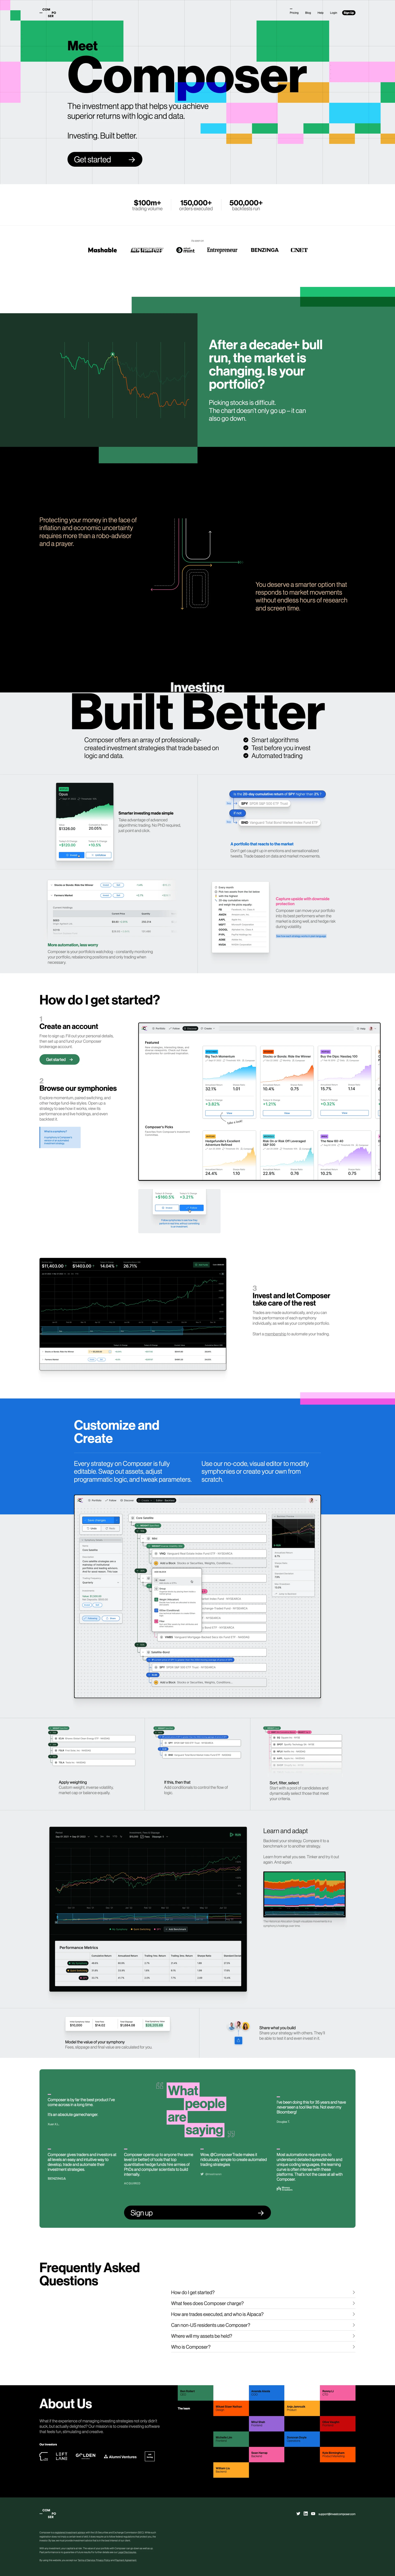 Composer Landing Page Example: The investment app that helps you achieve superior returns with logic and data. Investing. Built better.